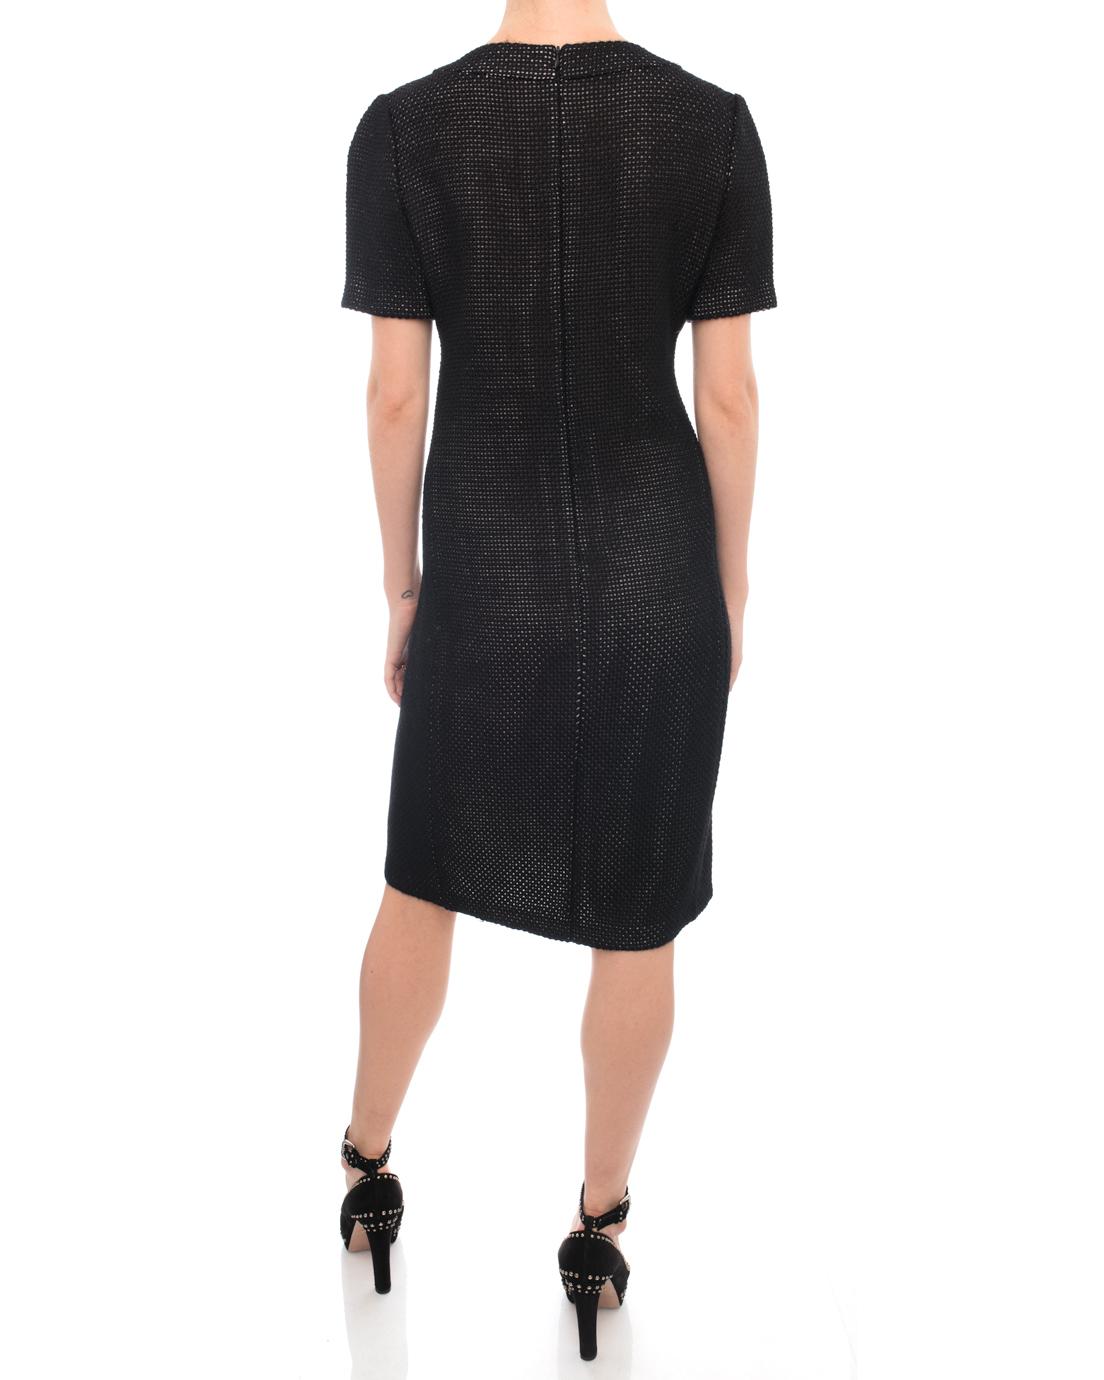 Women's Fendi Black 1960’s Style Dress with Flower Accent - 8